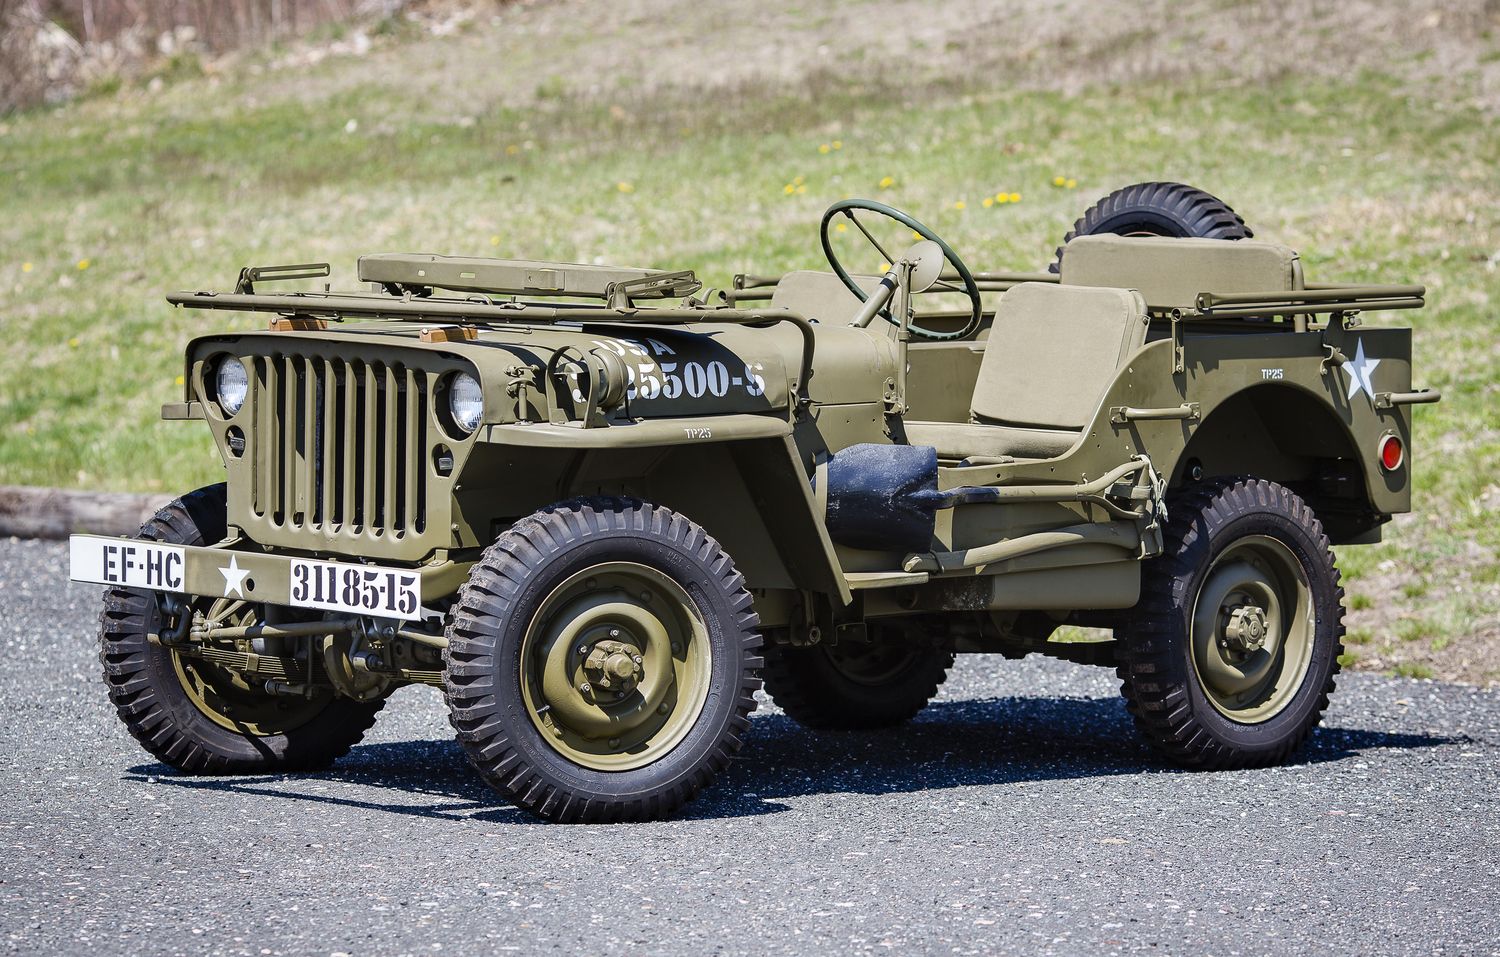 Willys Jeep wallpapers Vehicles HQ Willys Jeep pictures 4K